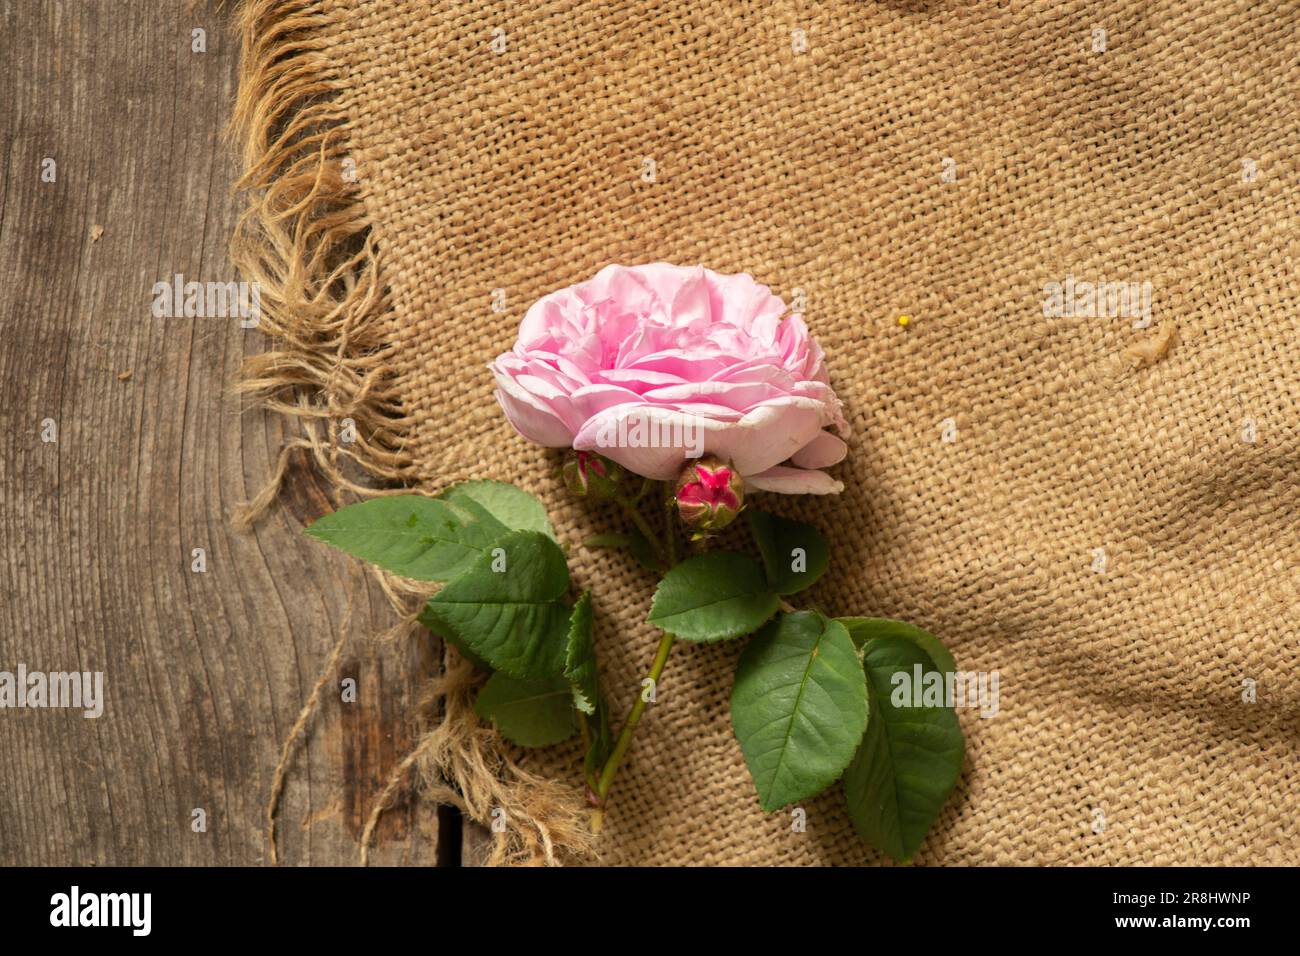 pink roses on a wooden old table on burlap, floral background, roses Stock Photo